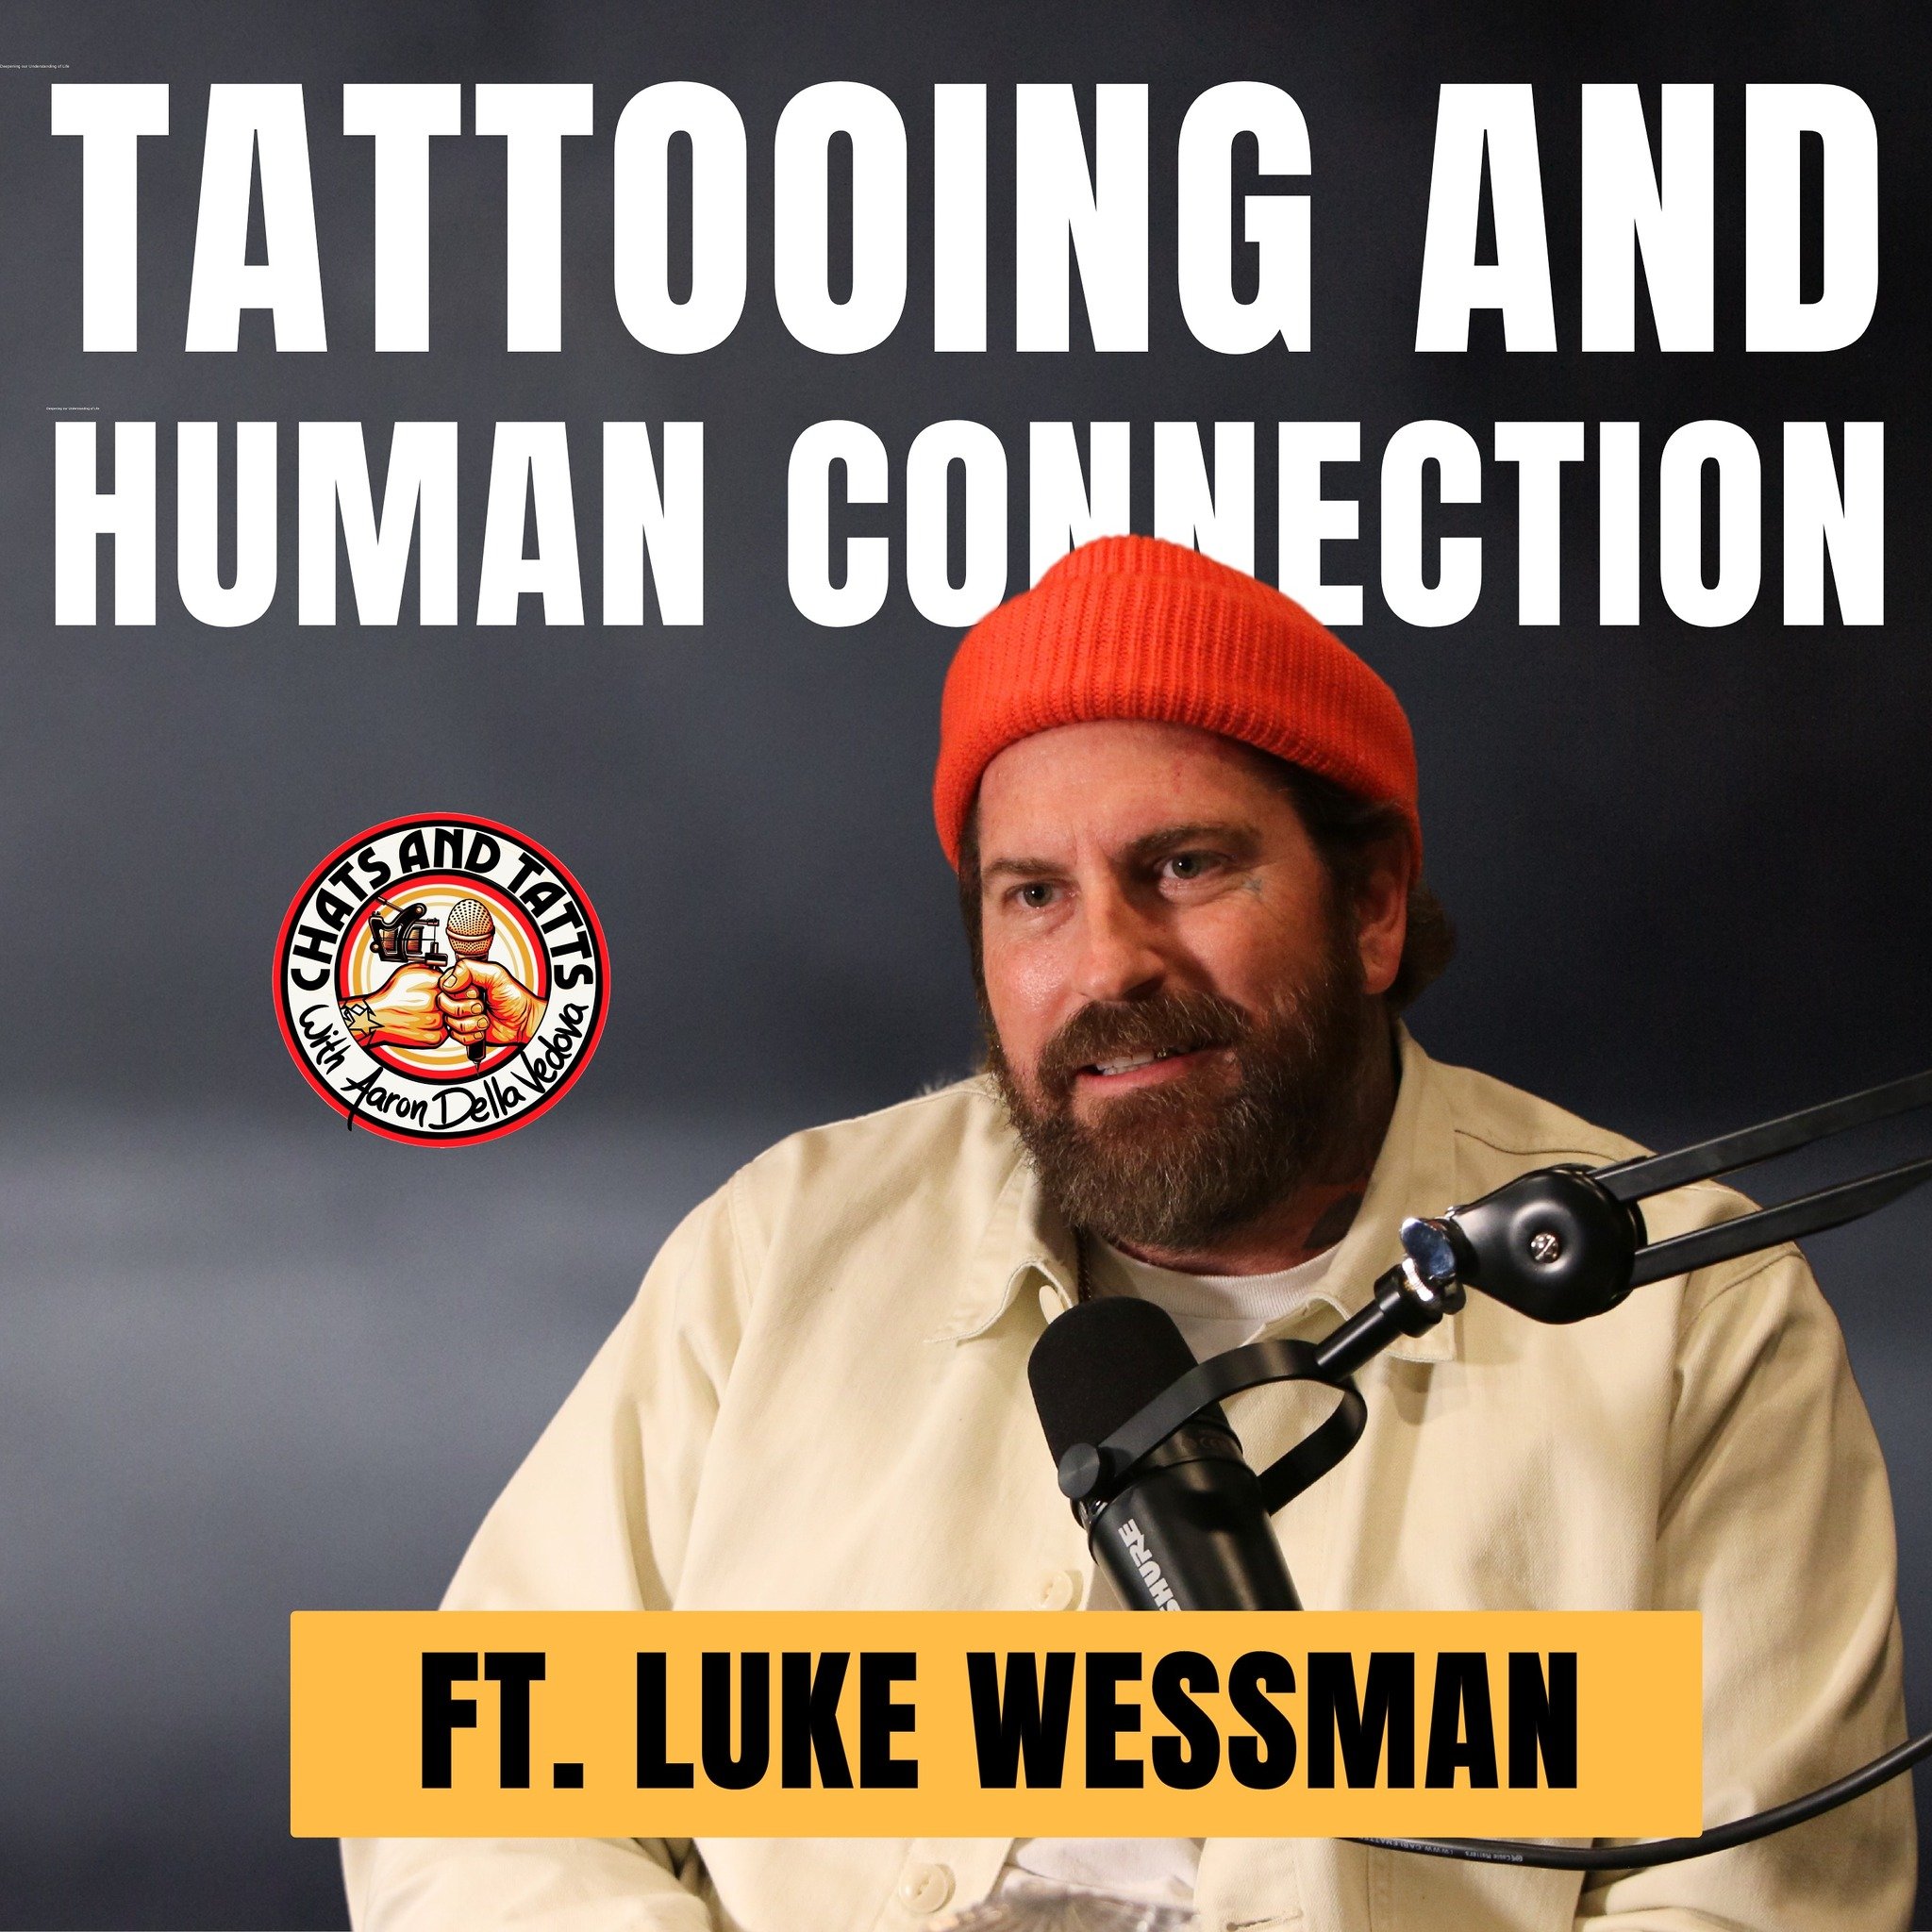 Here are three key takeaways from our chat with Luke Westman:

1. Embracing Change and Growth: Luke&rsquo;s story is a testament to the importance of embracing change and taking risks. From leaving a stable job as an electrician to diving headfirst i